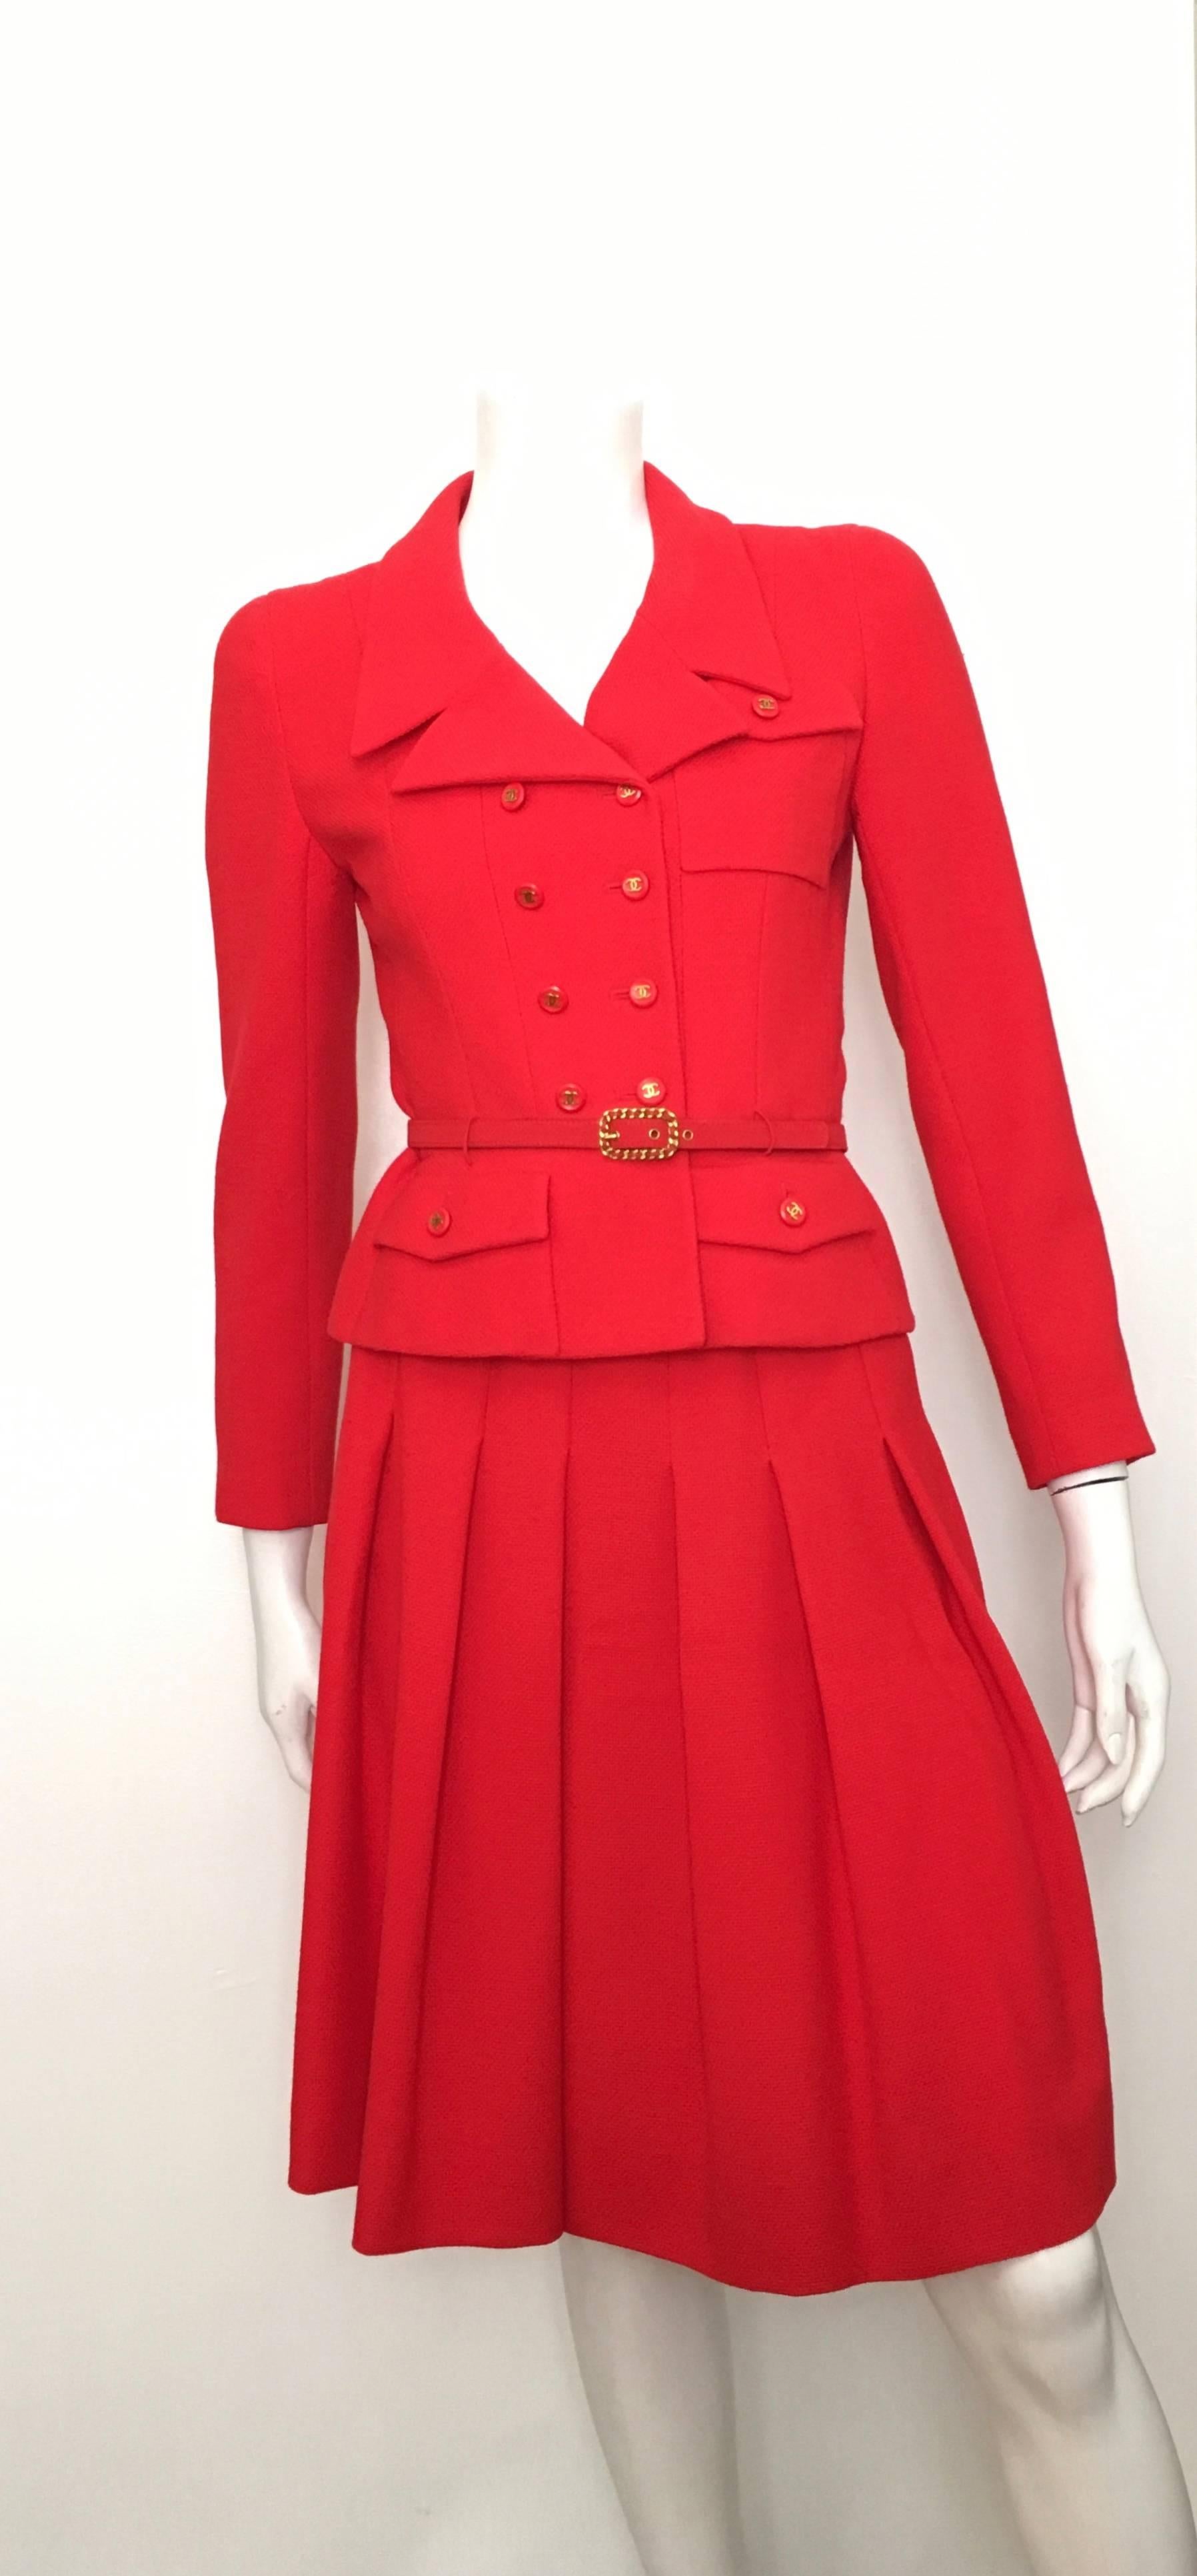 Chanel 1980s signature red powerhouse jacket & pleated suit is a French size 38 but fits like an USA size 4.  Ladies please use your measuring tape so you can properly measure your bust, waist & hips to make certain this will fit your lovely body